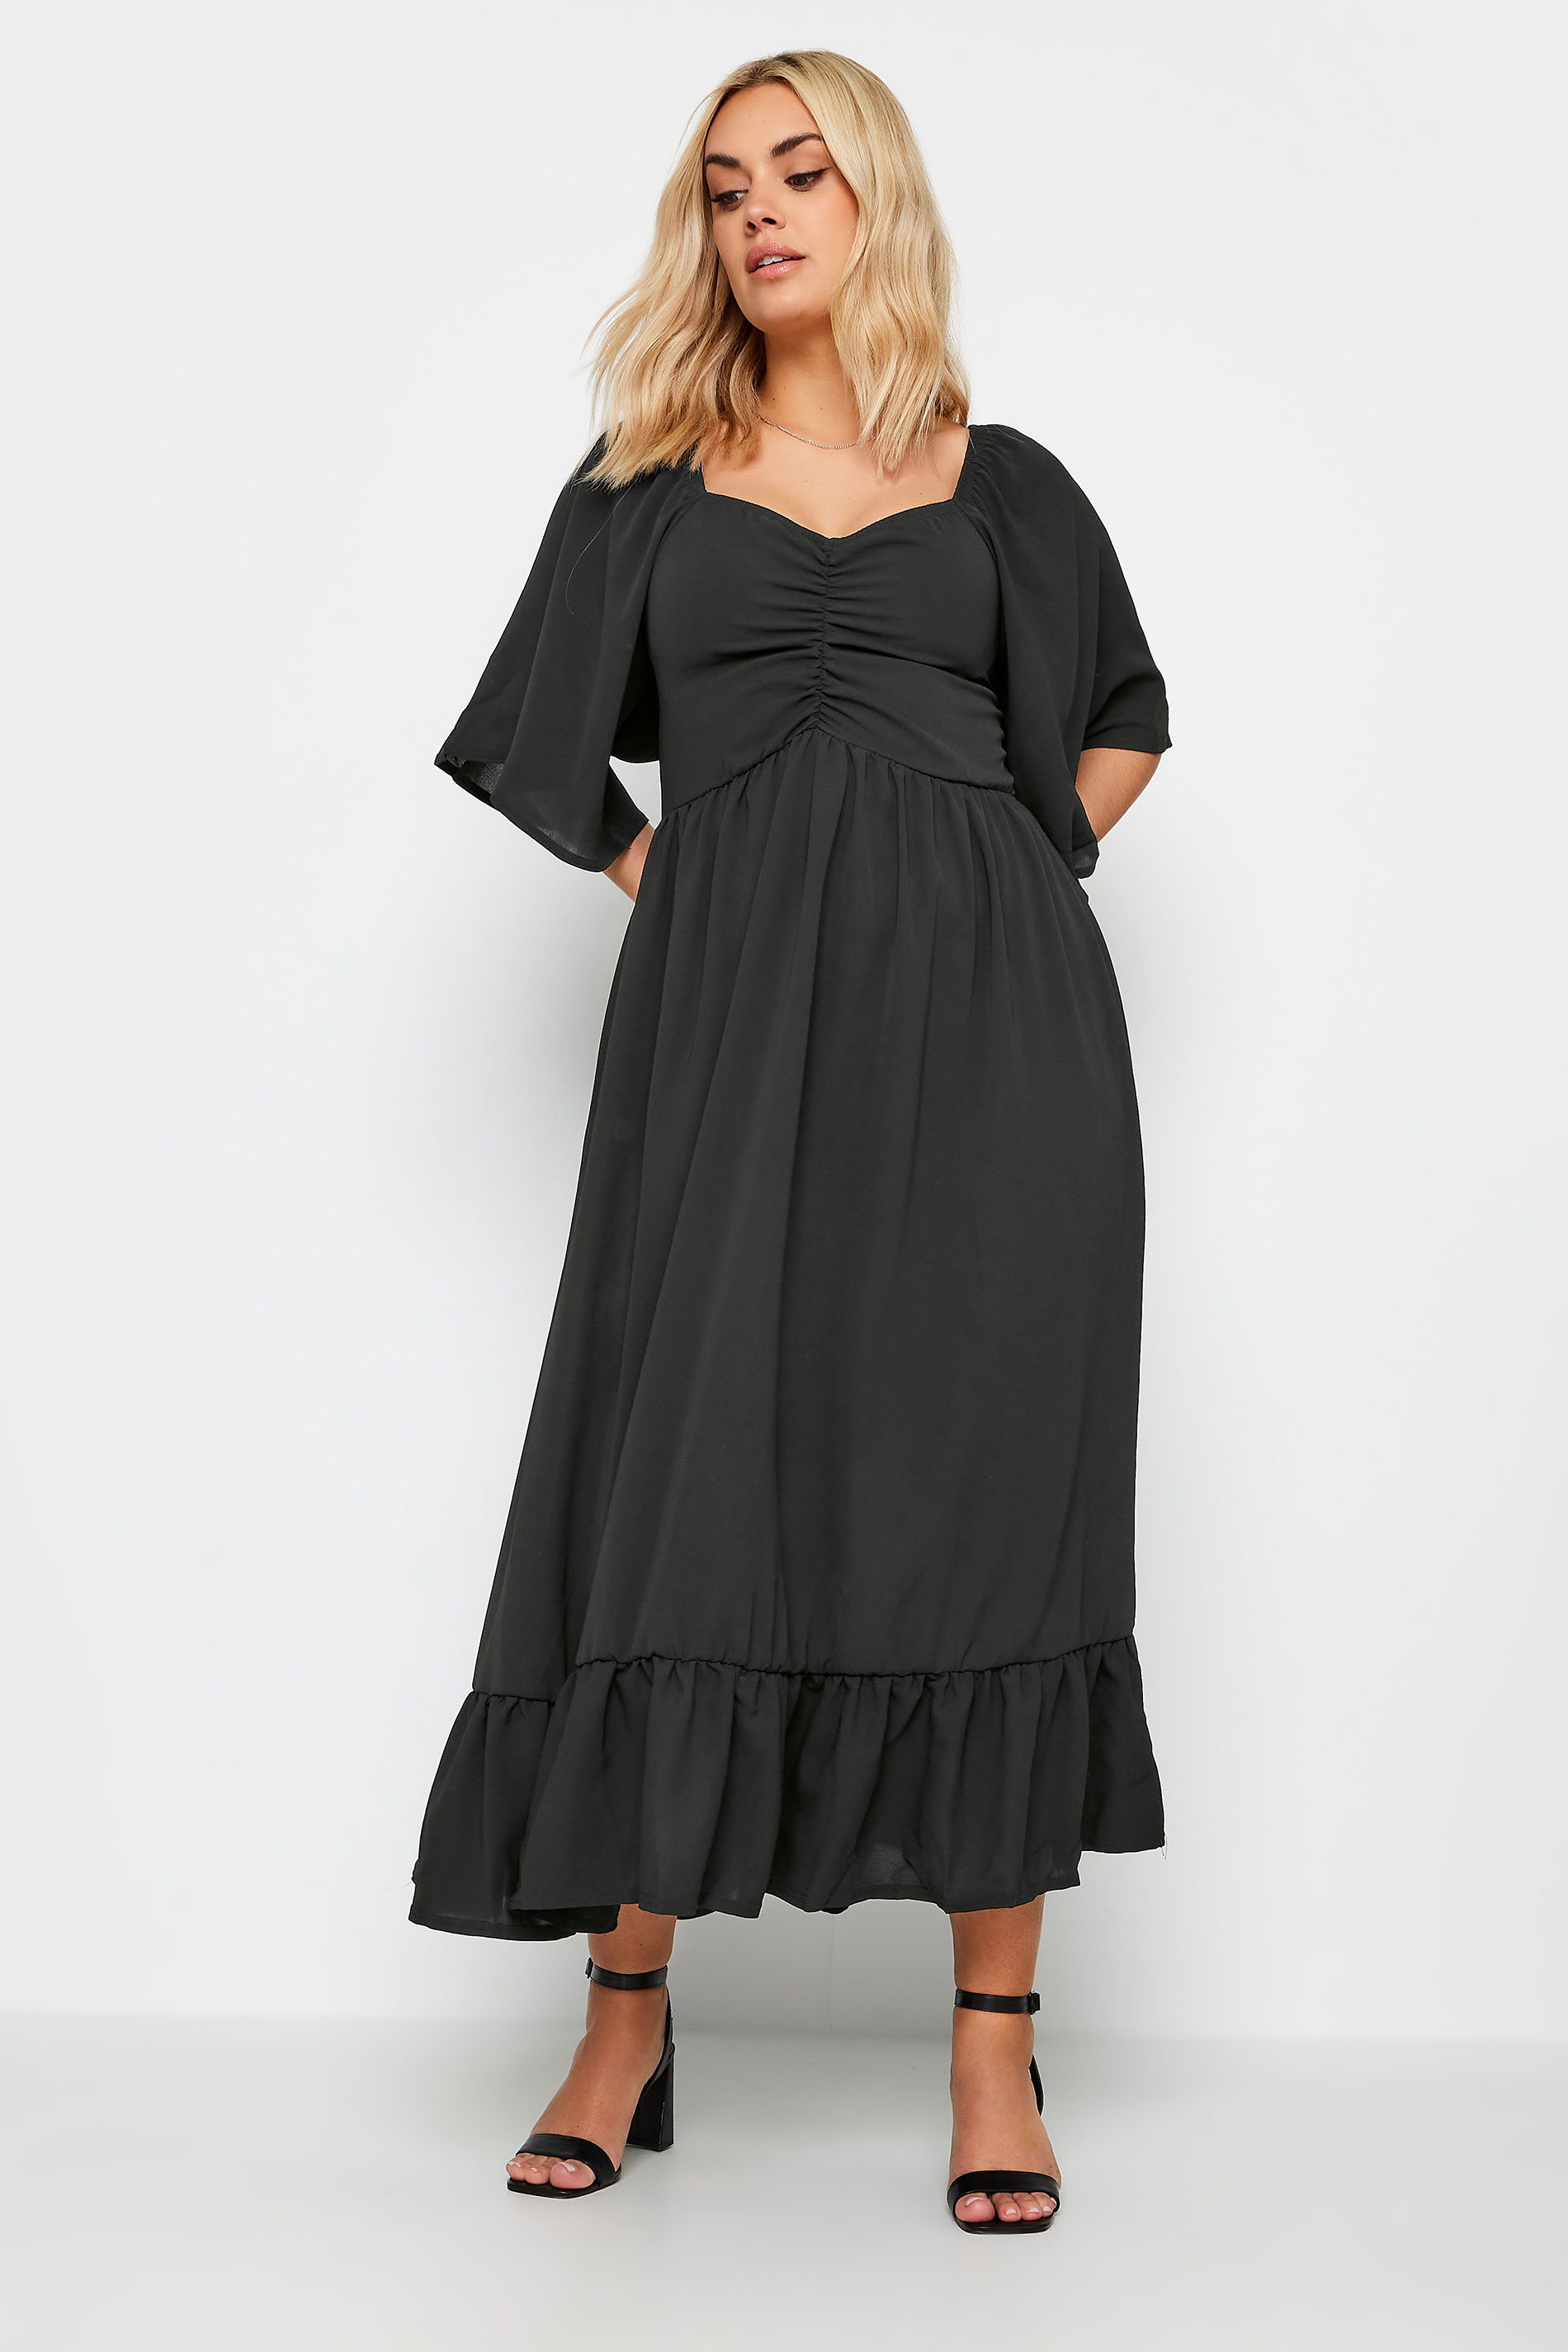 LIMITED COLLECTION Plus Size Black Ruched Angel Sleeve Dress | Yours Clothing 2